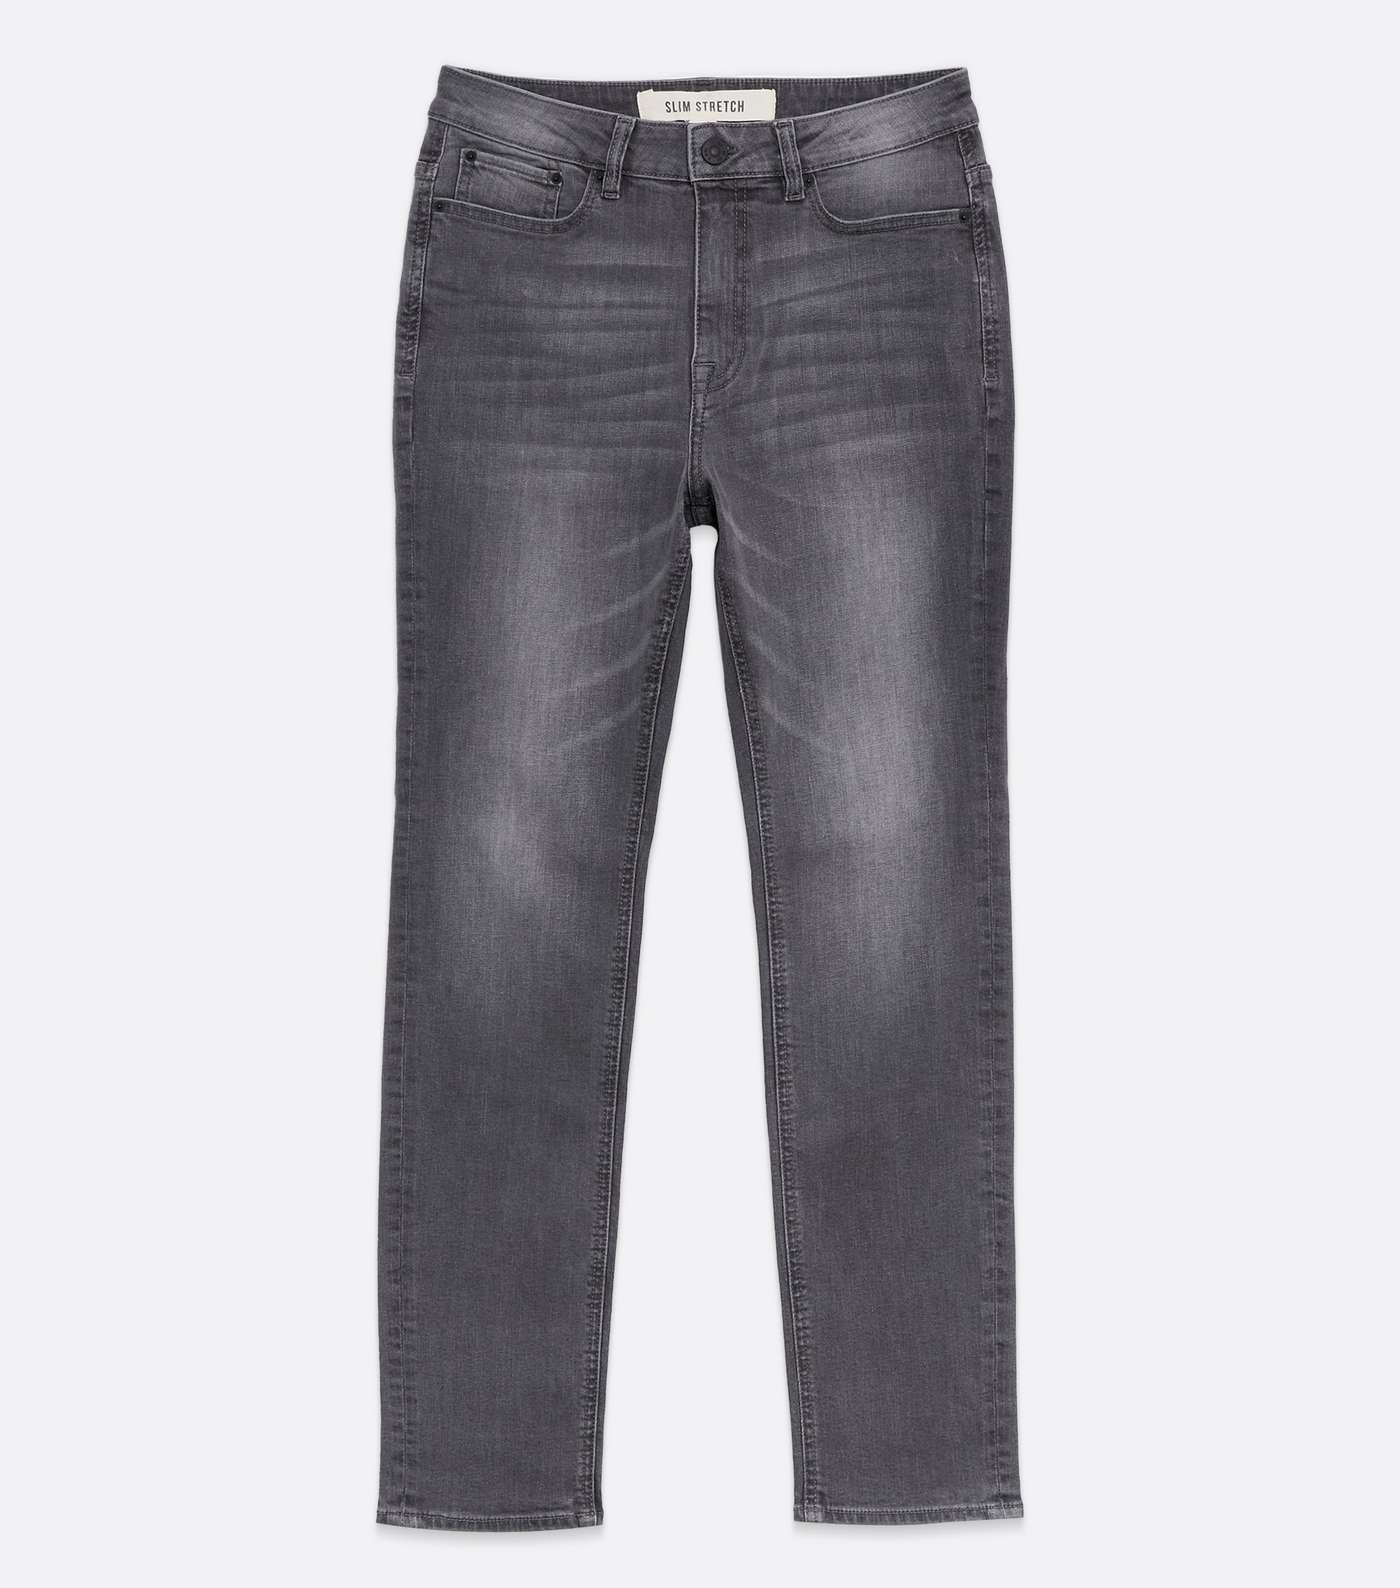 Pale Grey Washed Slim Stretch Jeans Image 5